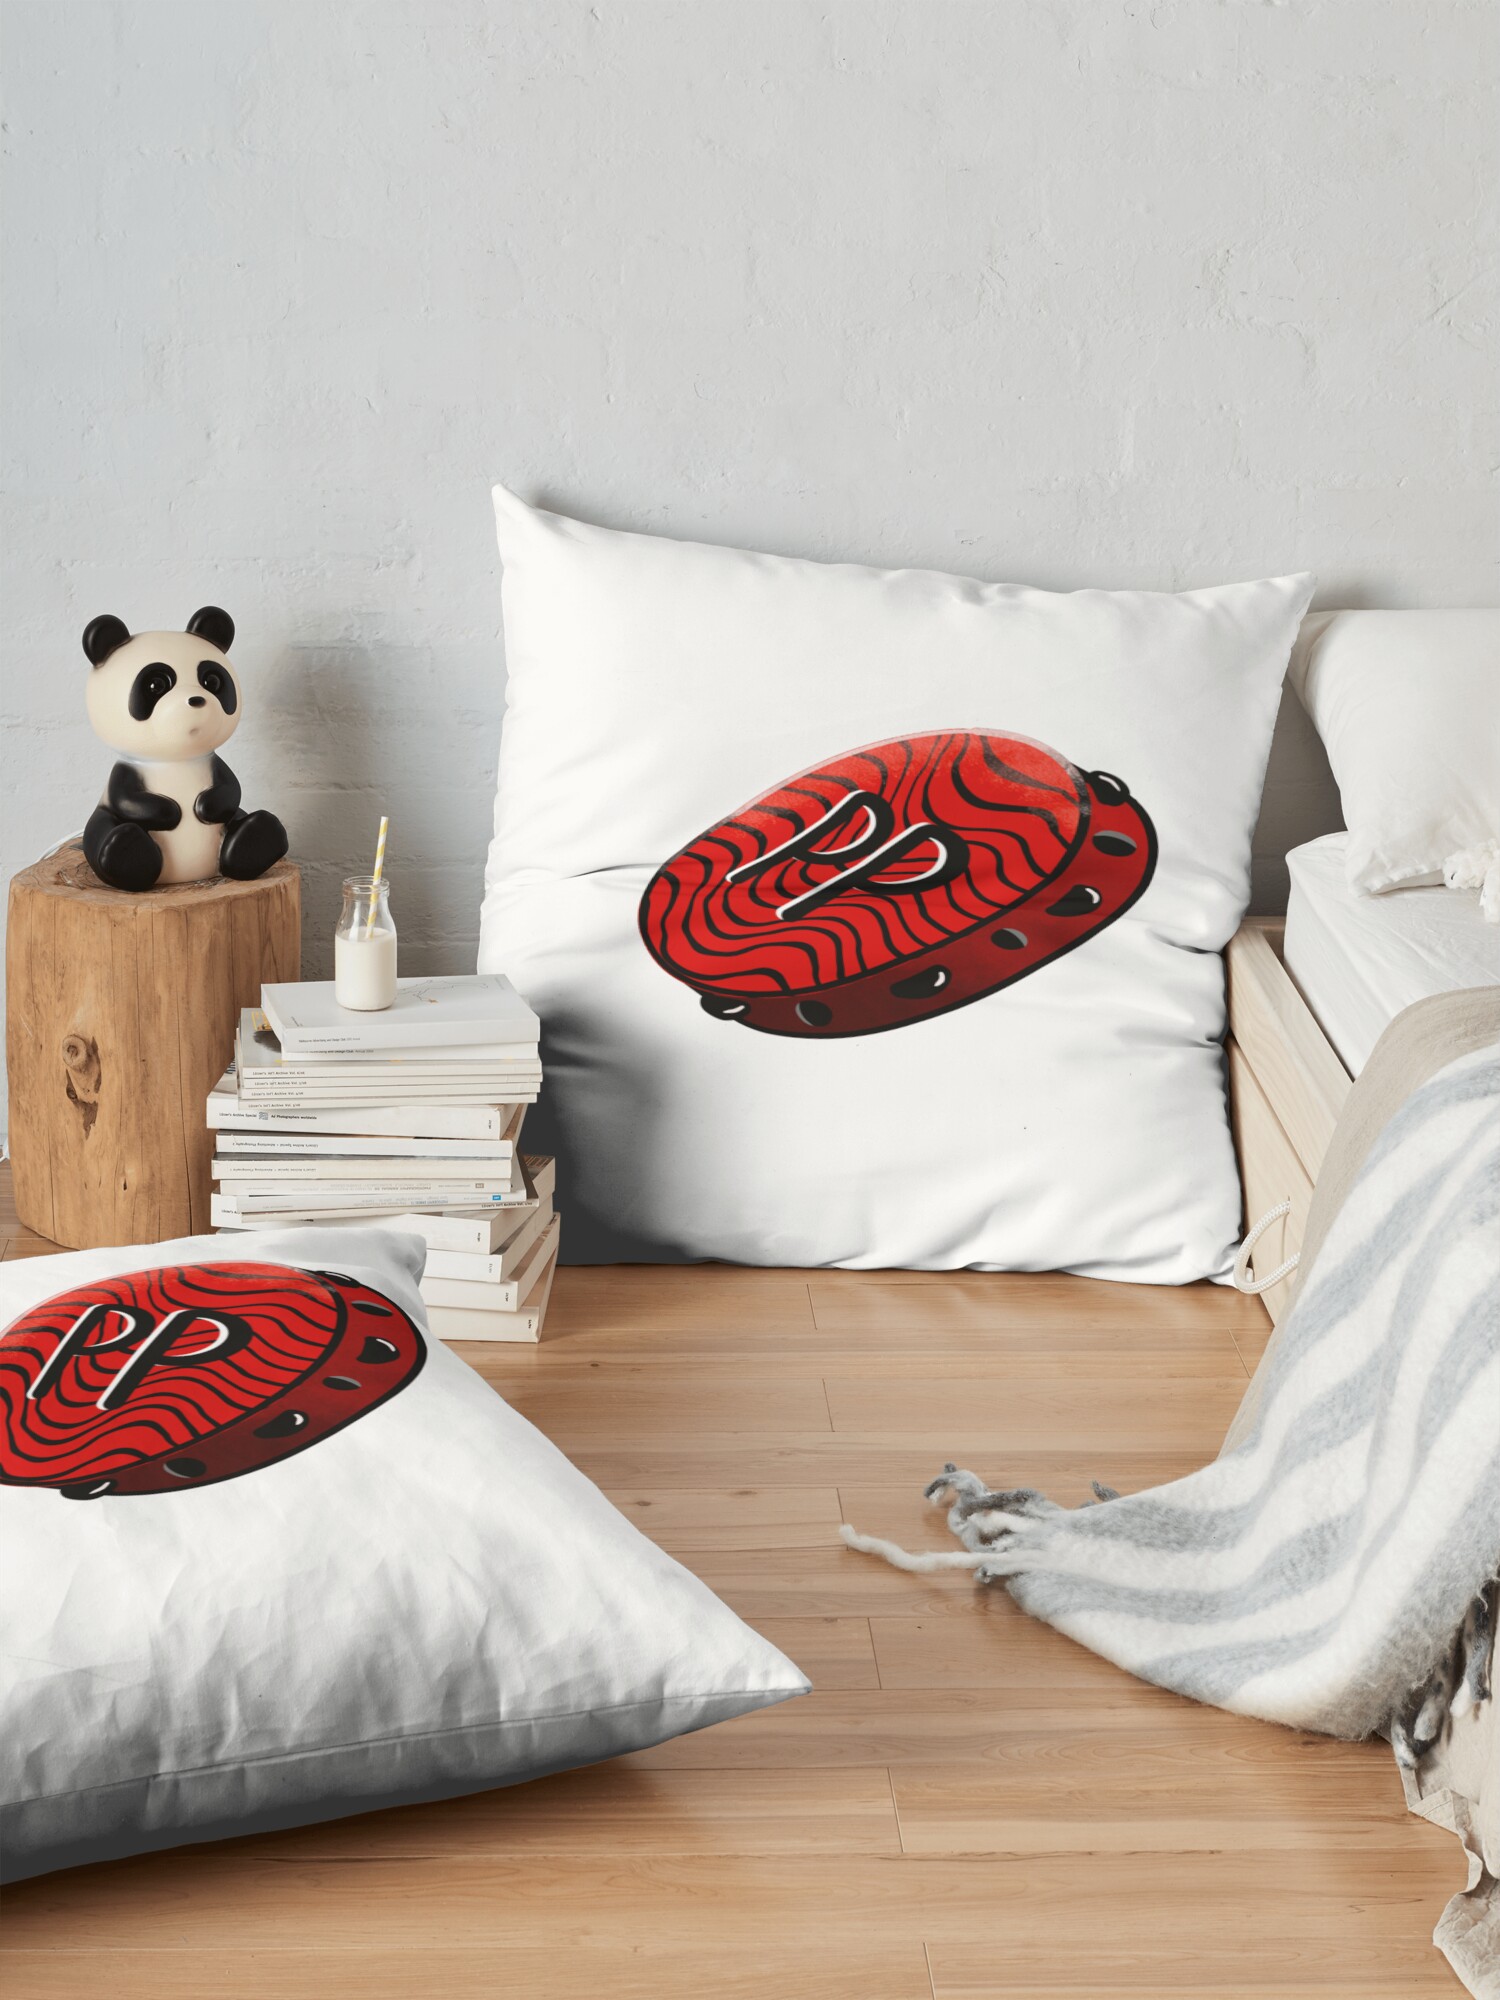 throwpillowsecondary 36x362000x2000 bgf8f8f8 8 - Pewdiepie Store